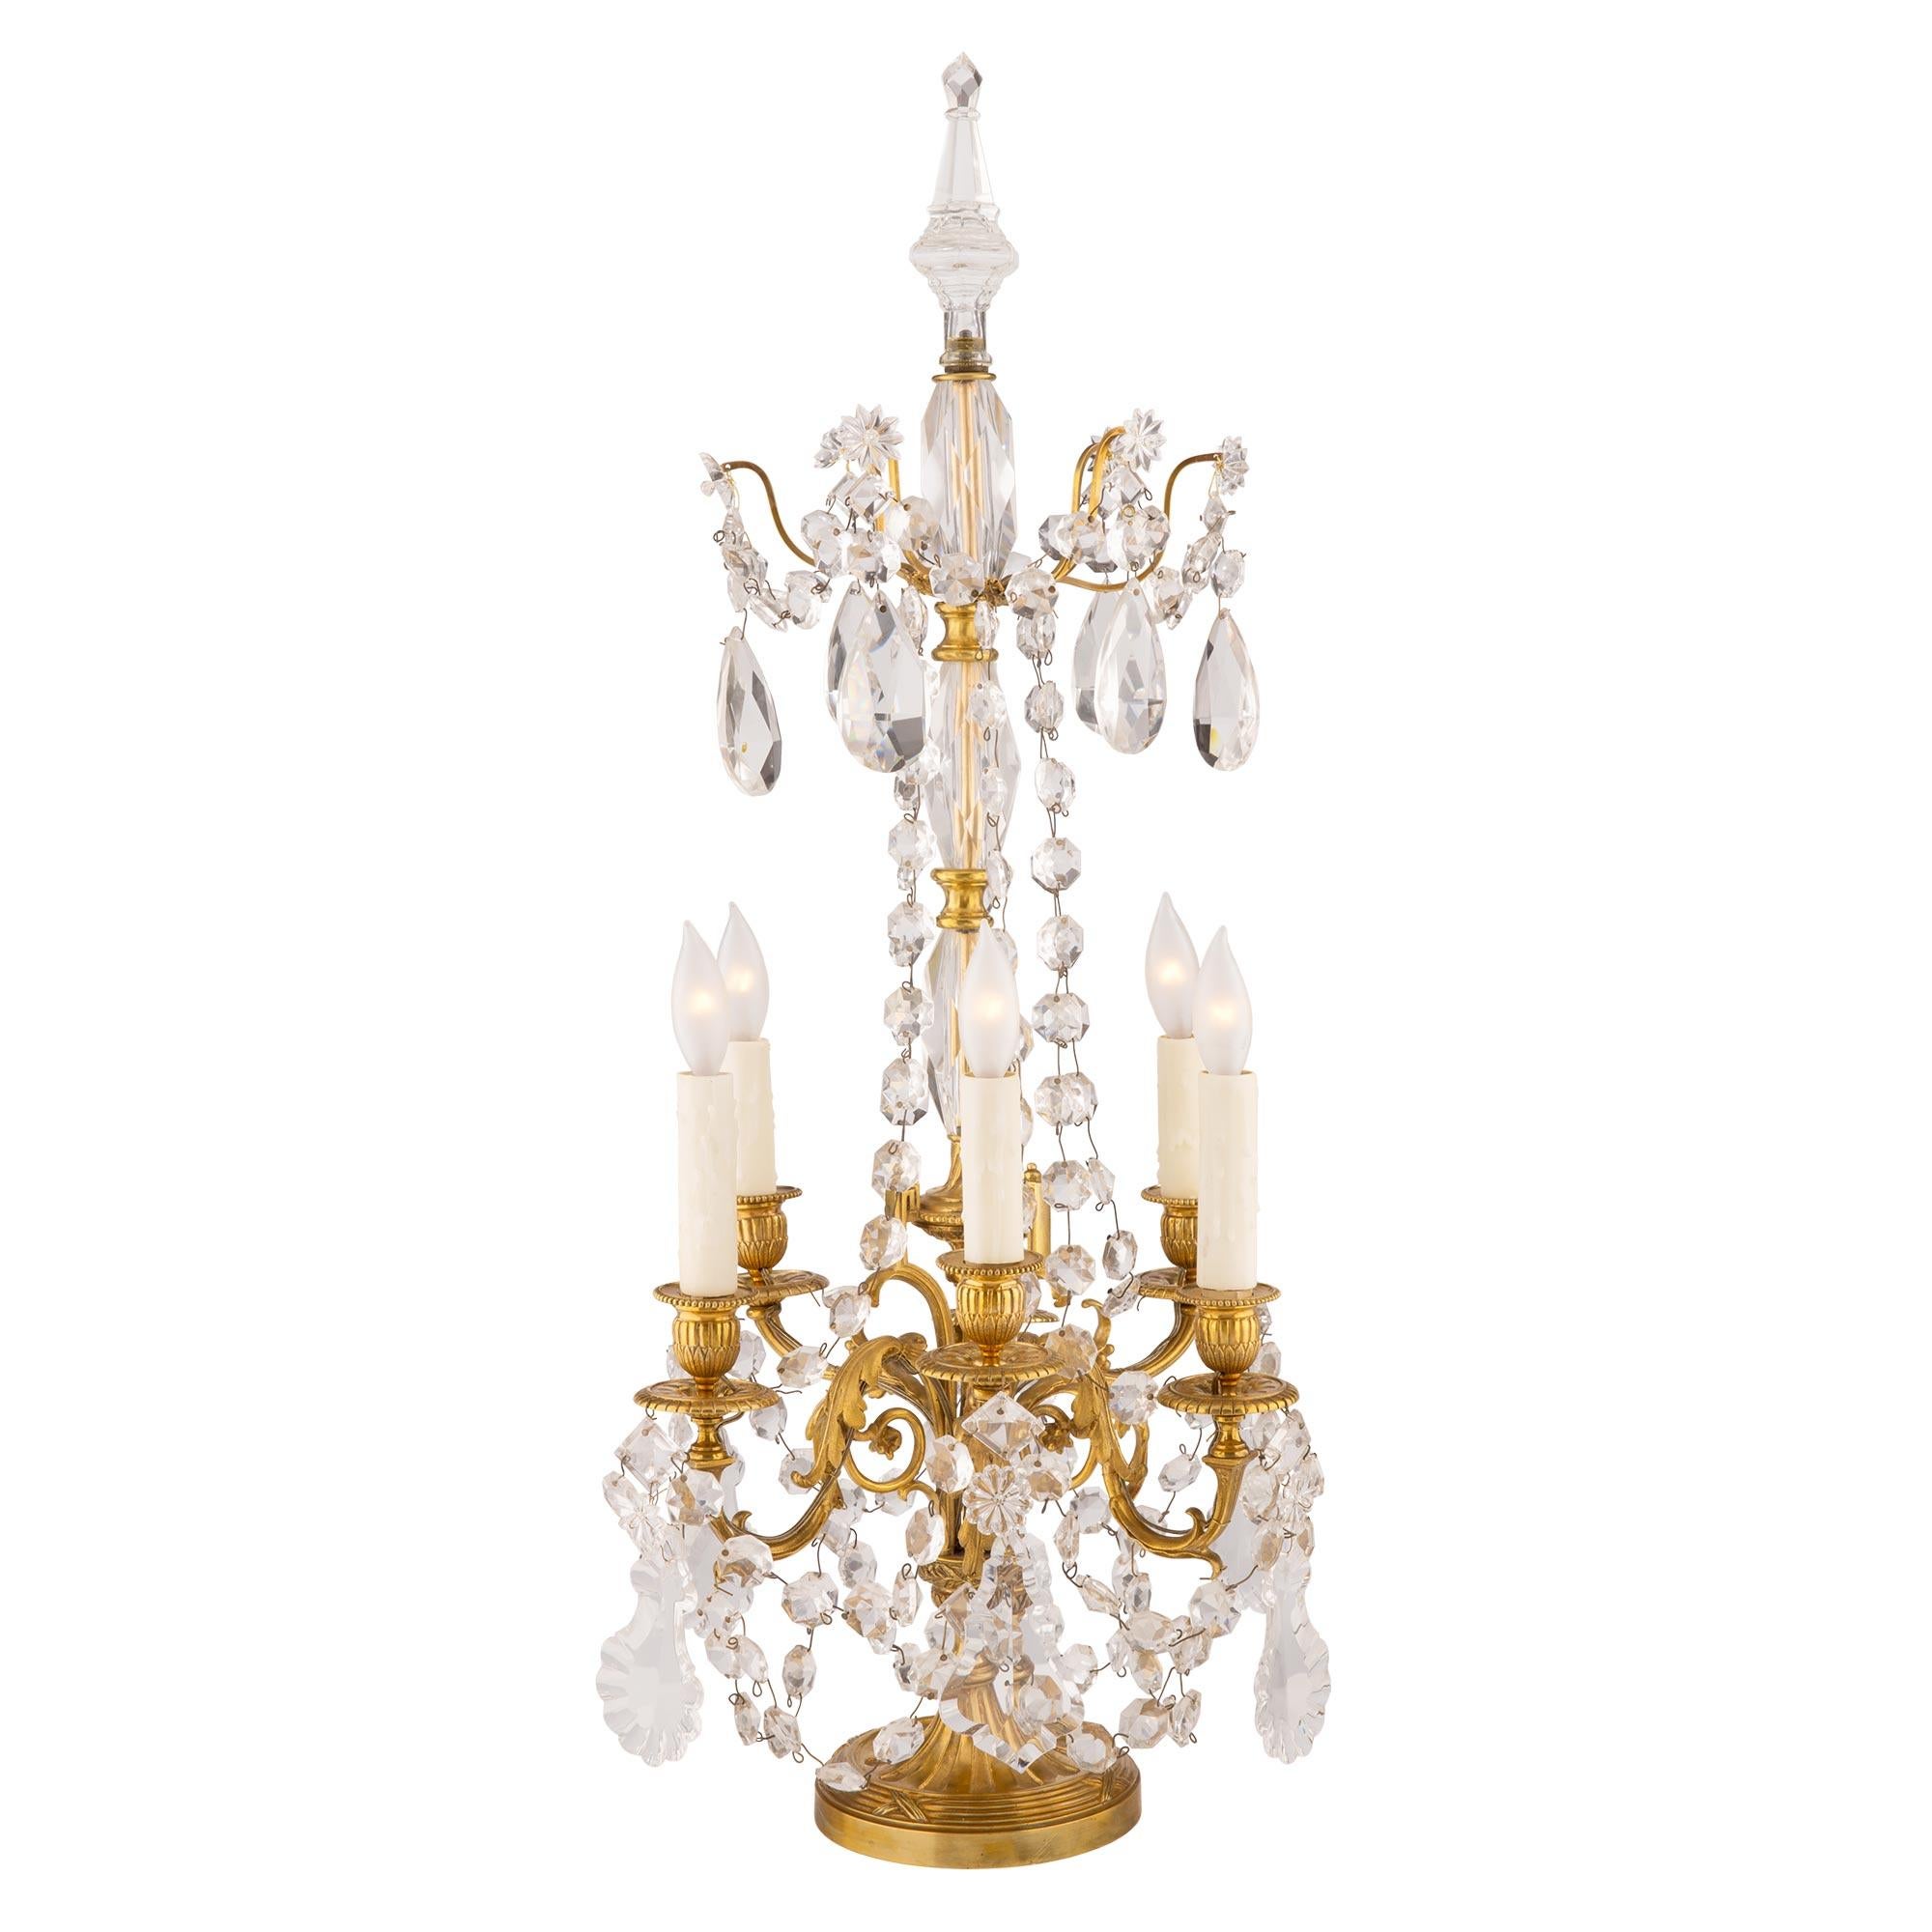 A most attractive French 19th century Louis XVI st. ormolu and Baccarat crystal Girandole lamp. The single Girandole is raised by an elegant circular base with a fine tied fluted wrap around band. Above the fluted socle pedestal are six beautifully